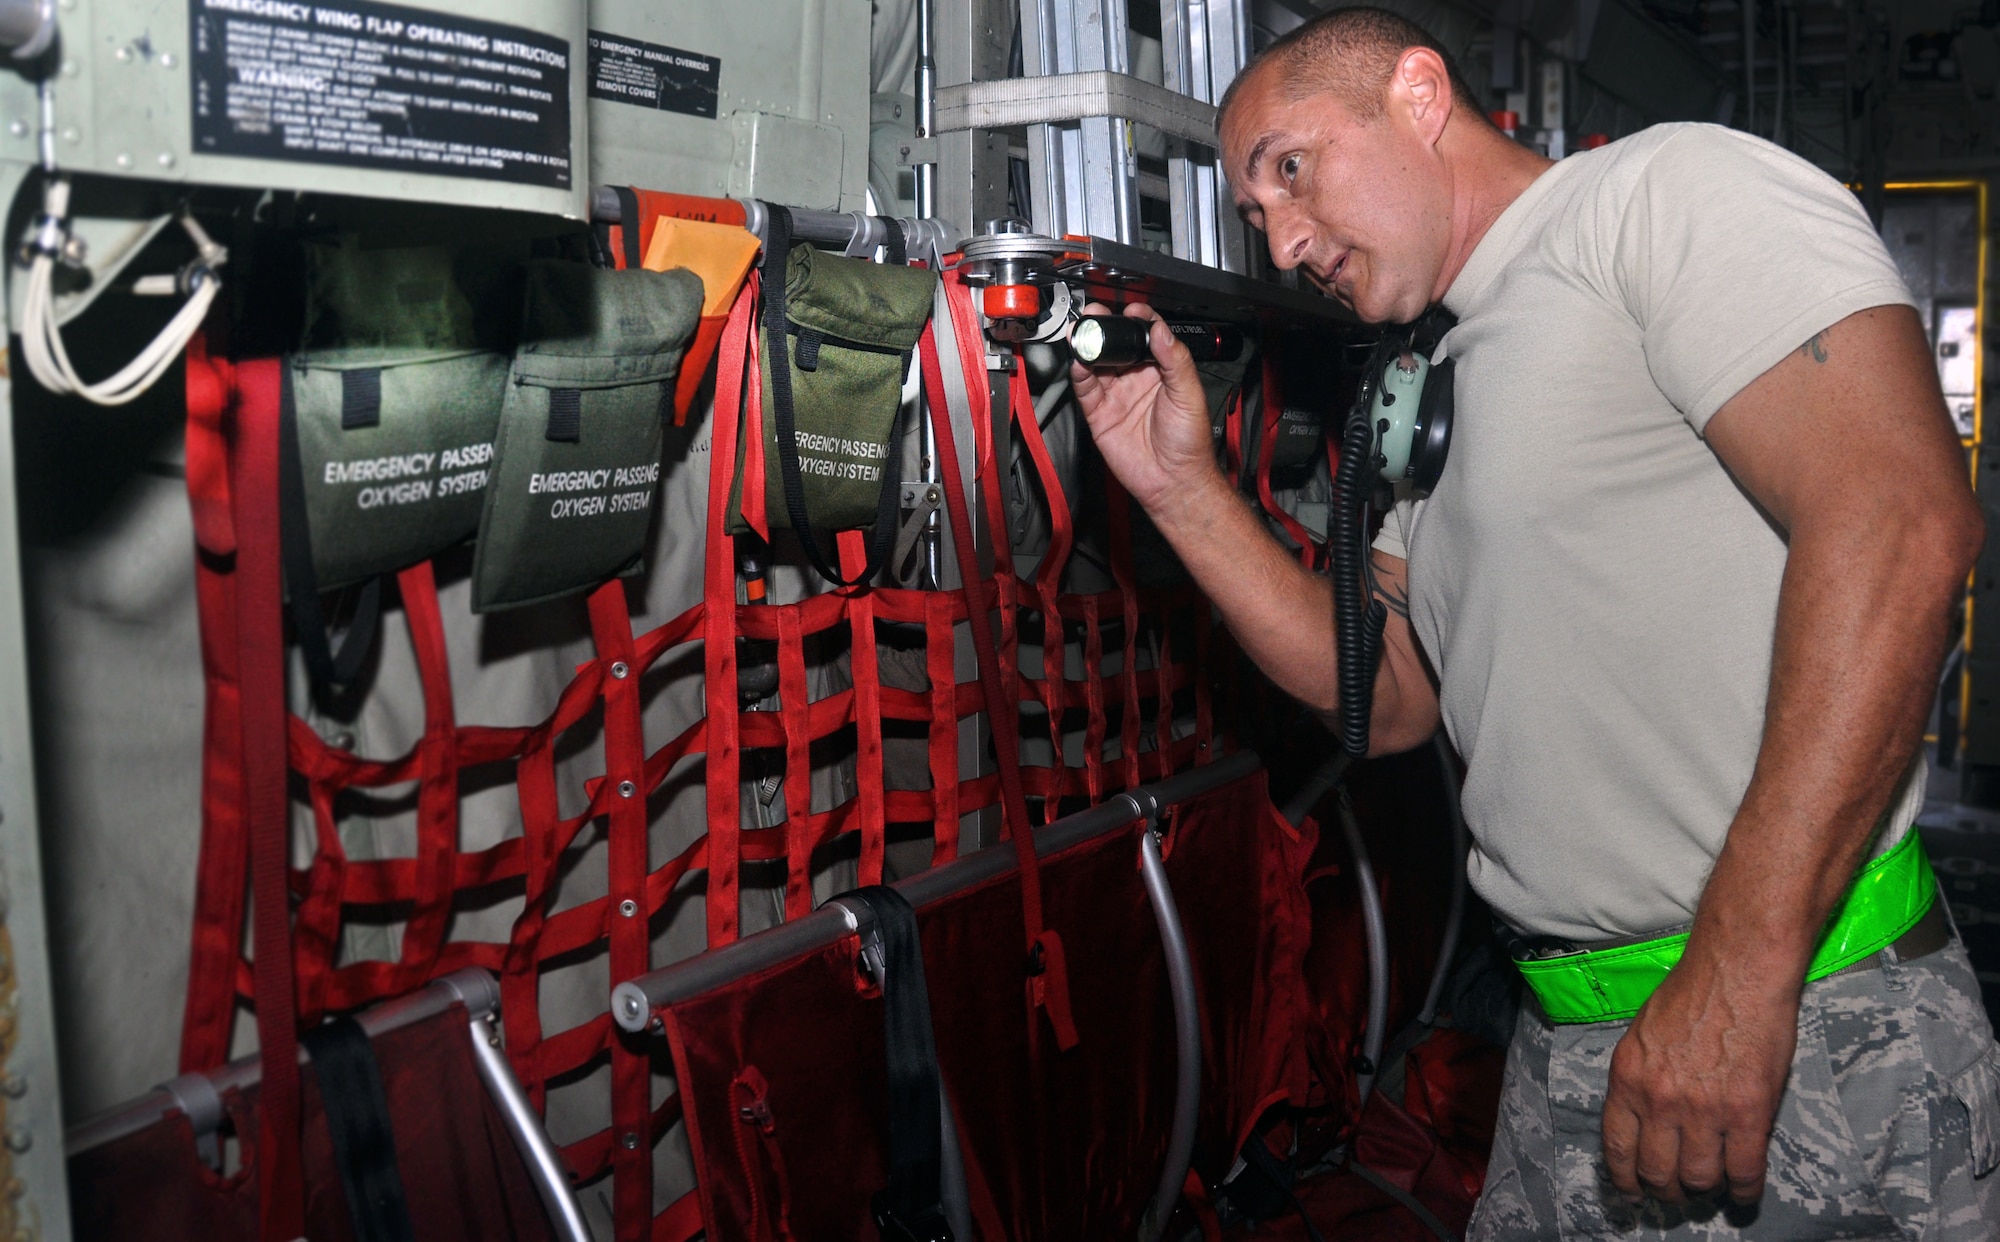 Tech. Sgt. Michael Santoy, a crew chief with the 440th Maintenance Squadron, performs an inspection of his C-130 H Hercules prior to a mission.  As a former Army paratrooper, Santoy jumped out of C-130s while assigned to the 7th Special Forces Group, formerly located at Ft. Bragg, N.C.  (U.S. Air Force Photo by Staff Sgt. Mark Thompson)